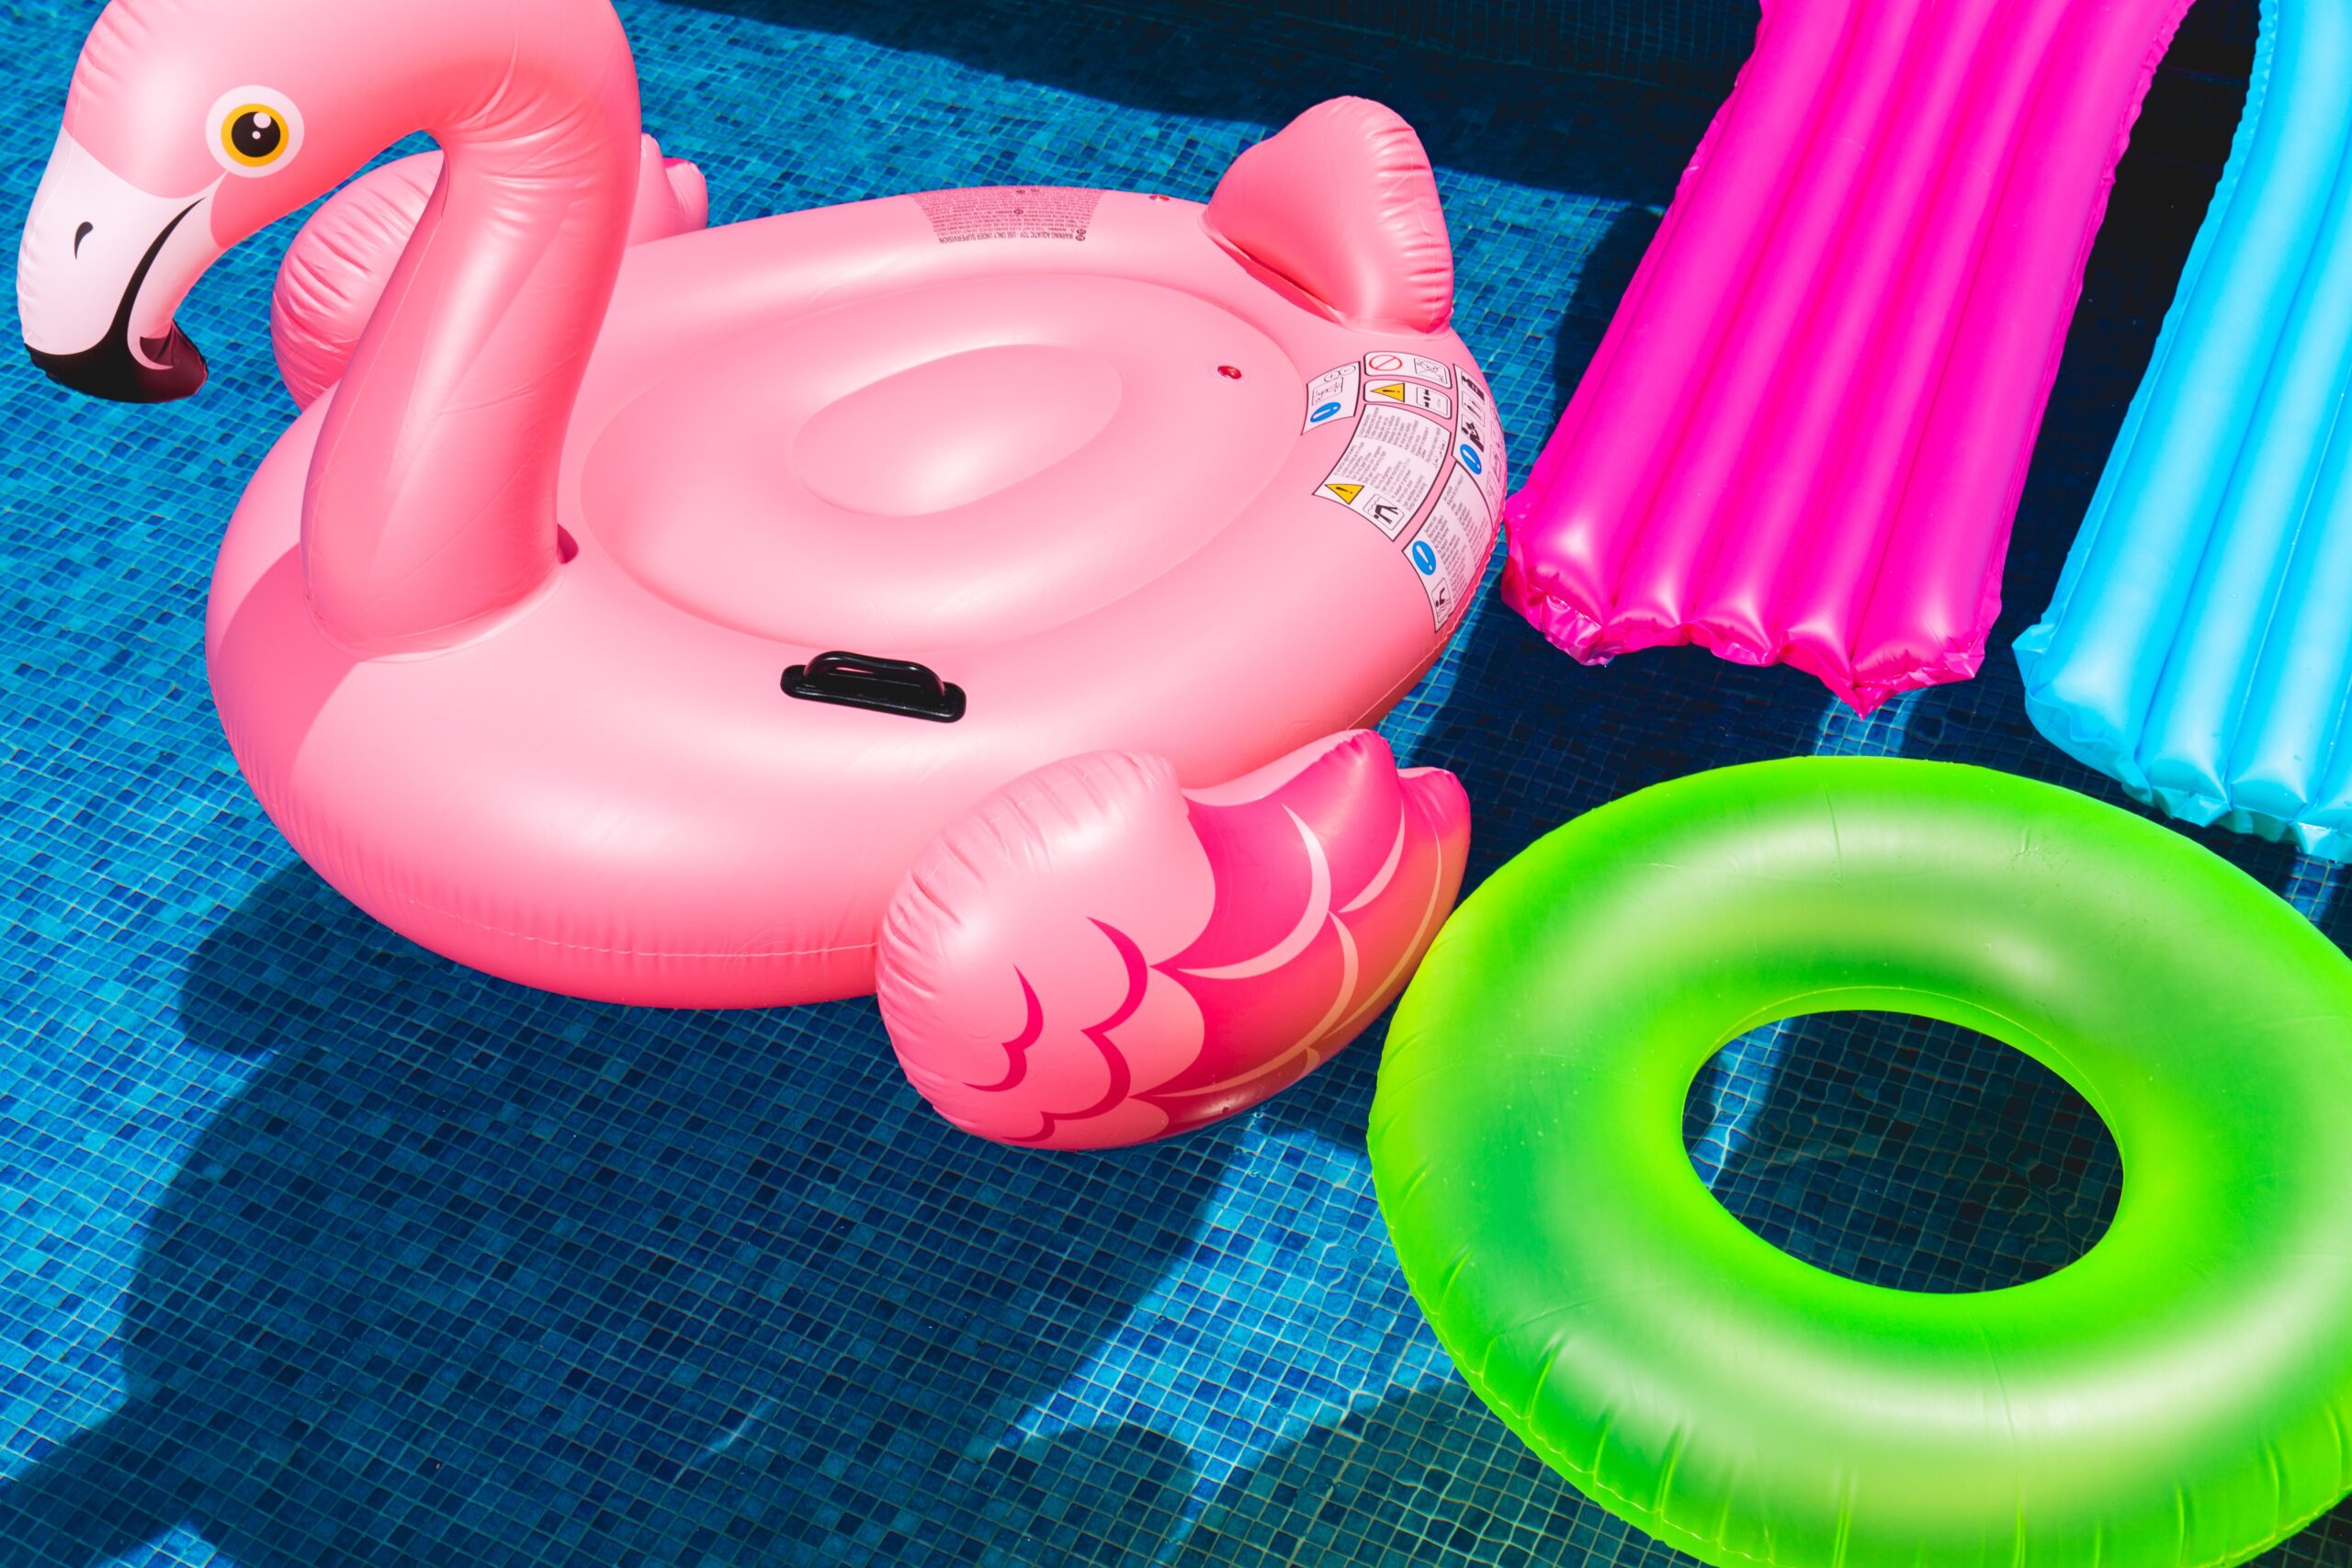 Removing toys and floats is key to winterizing a pool above ground. Pictured: Pool Toys and Floats.